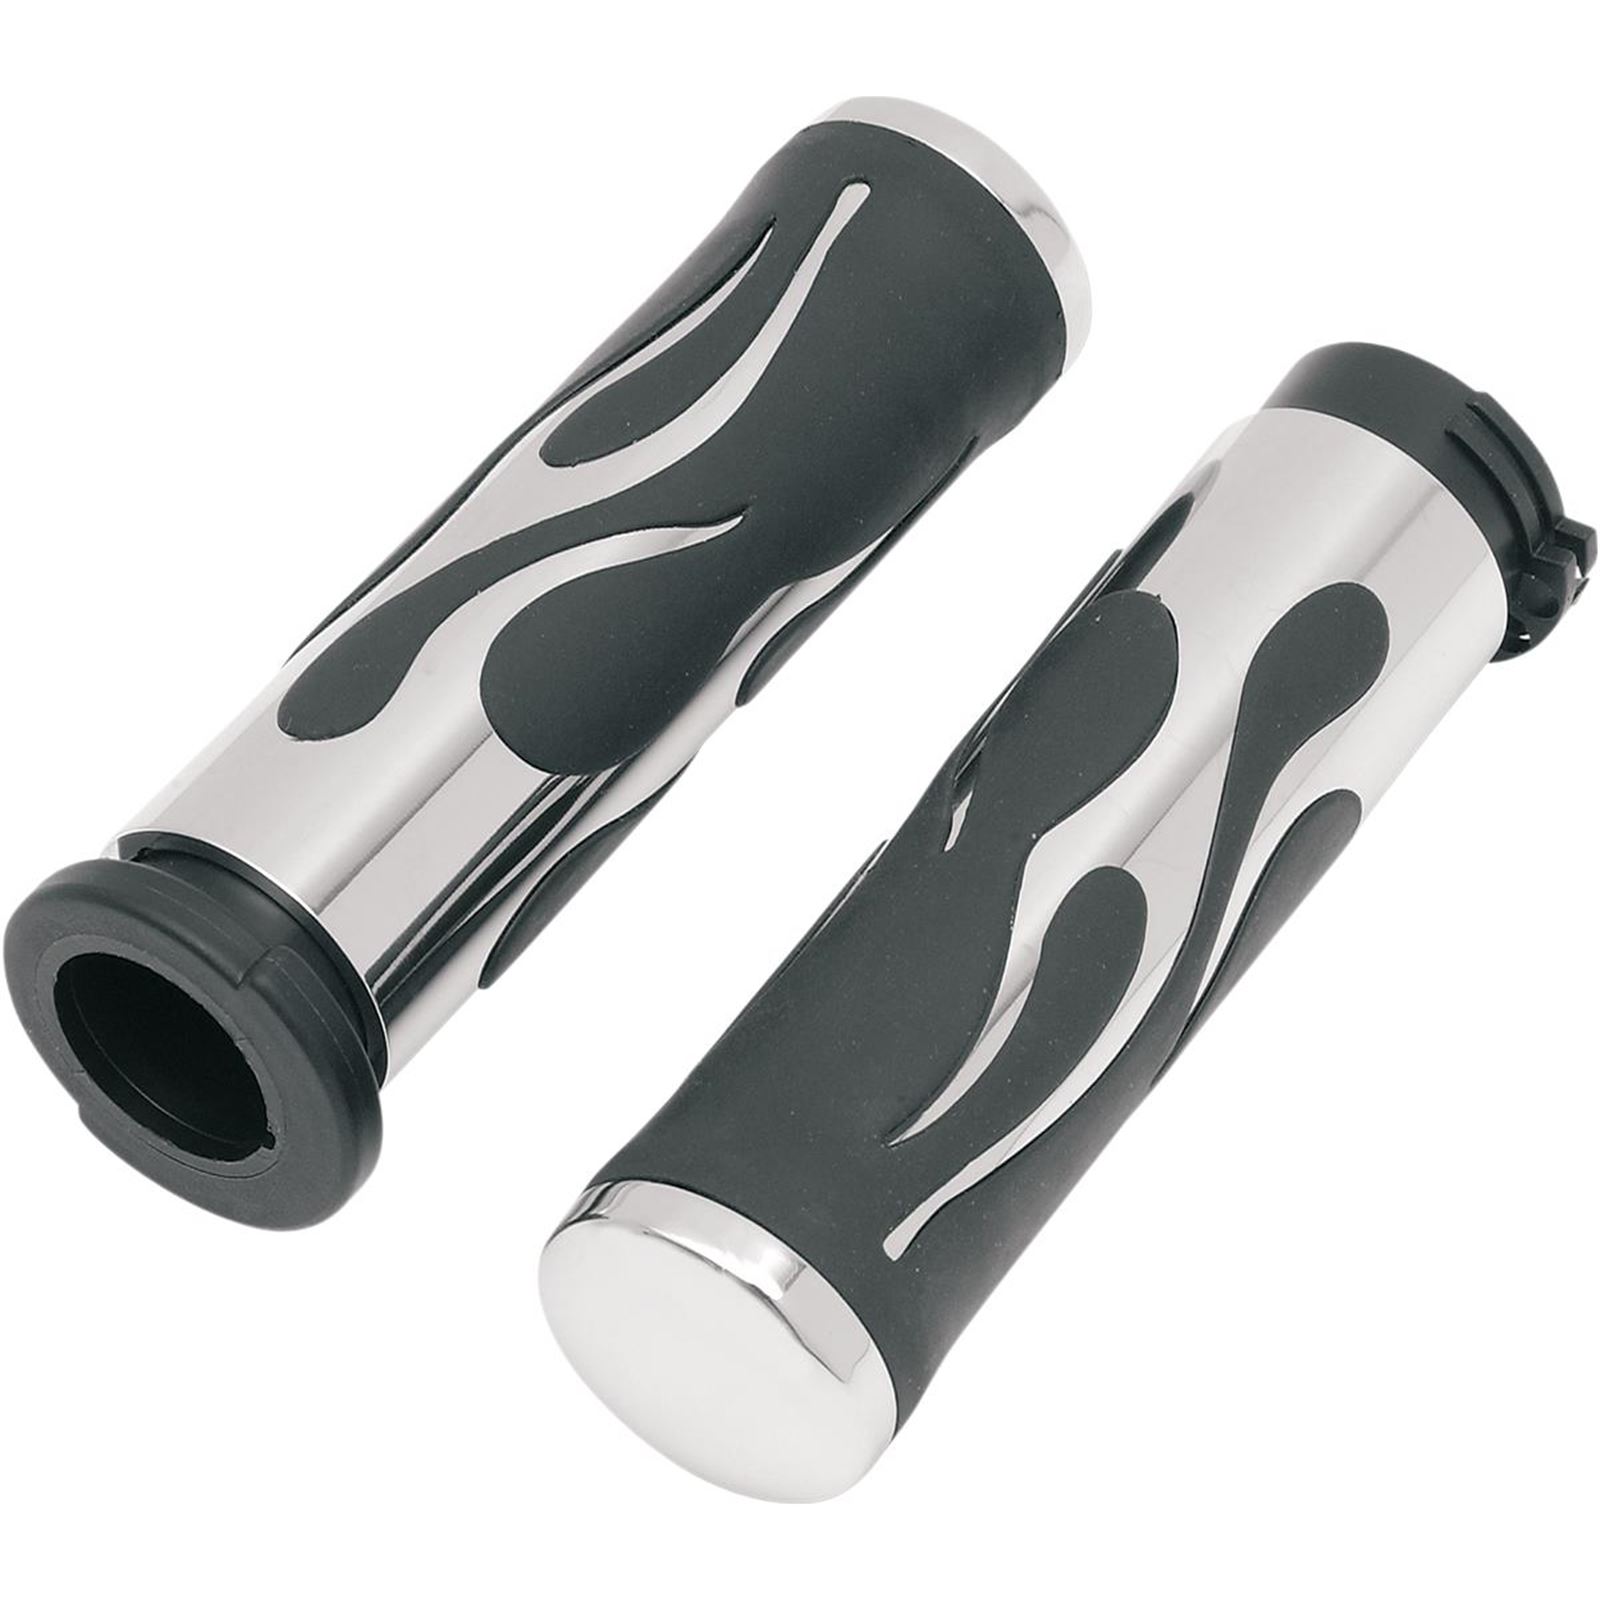 Drag Specialties Chrome Flamed Grips for Throttle-by-Wire